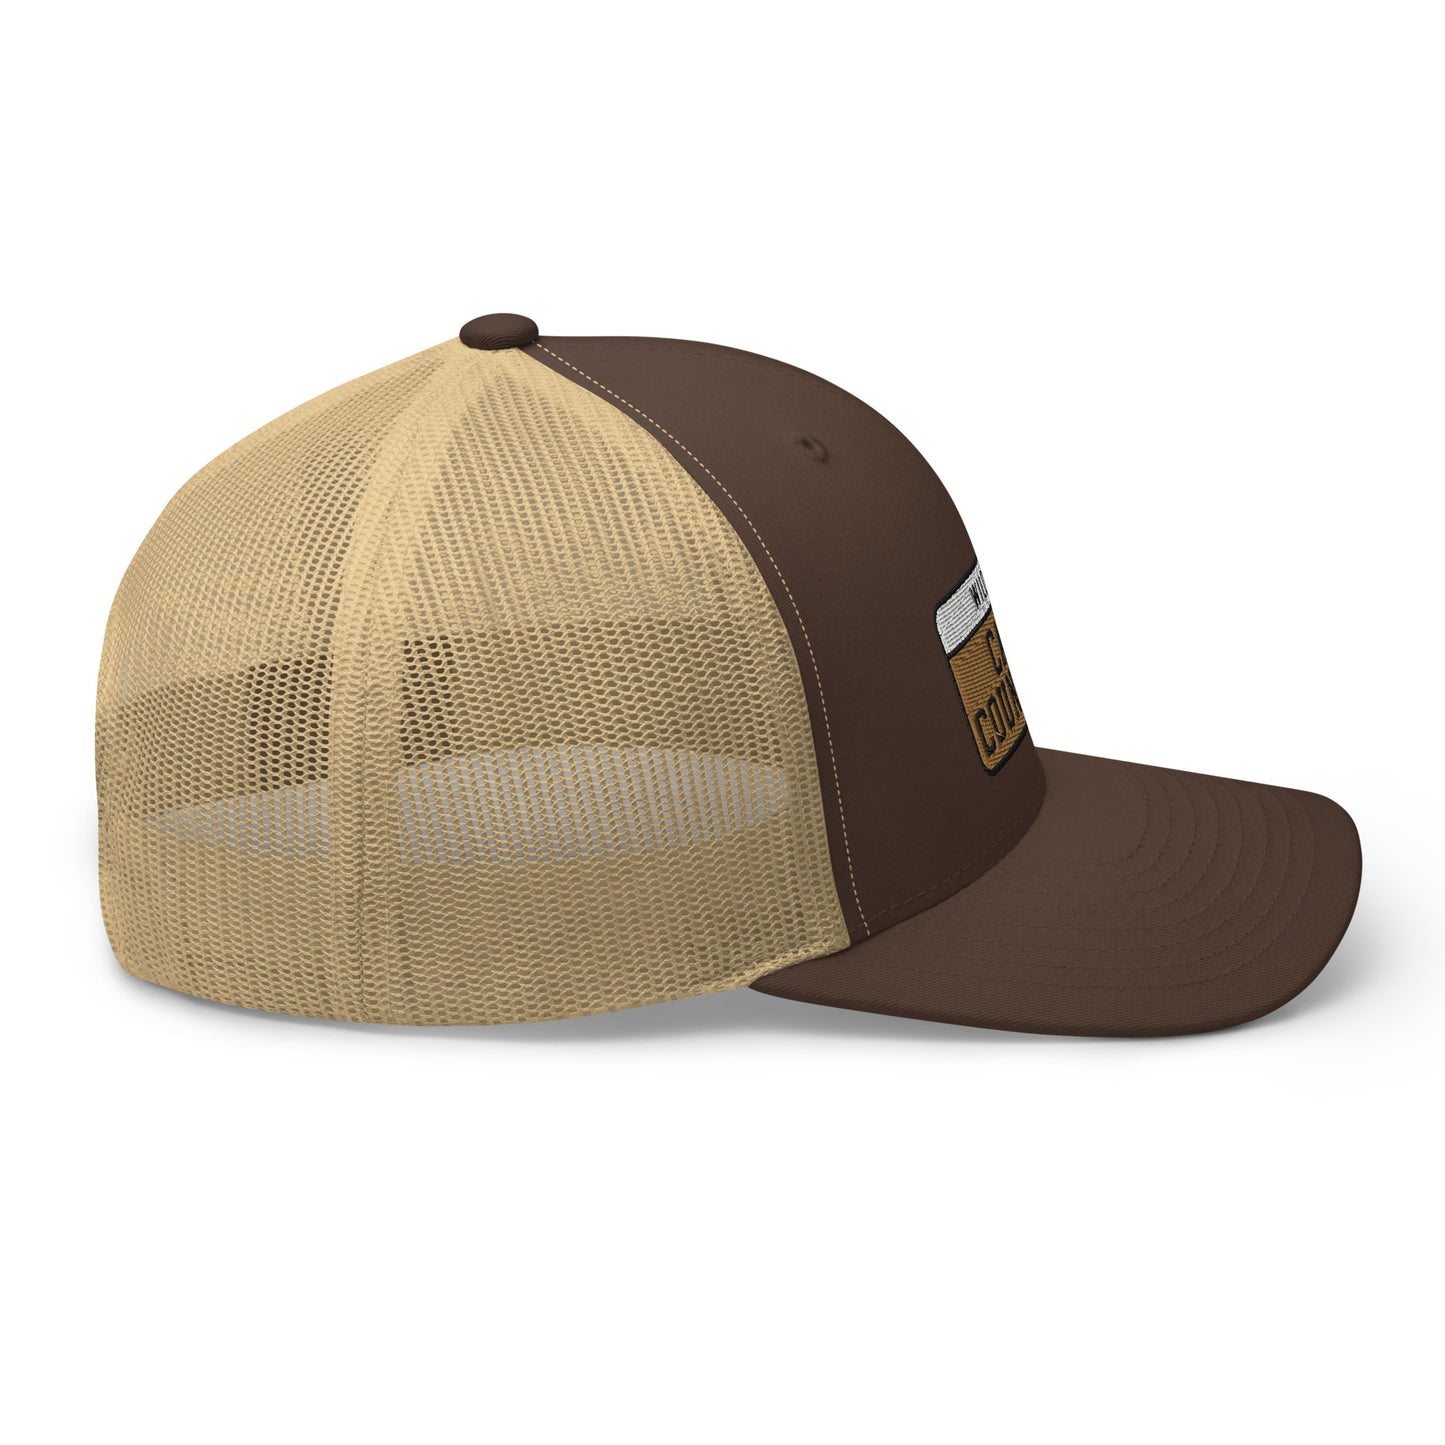 Wildfire Cigars embroidered Camp Counselor retro trucker in brown and khaki facing the right